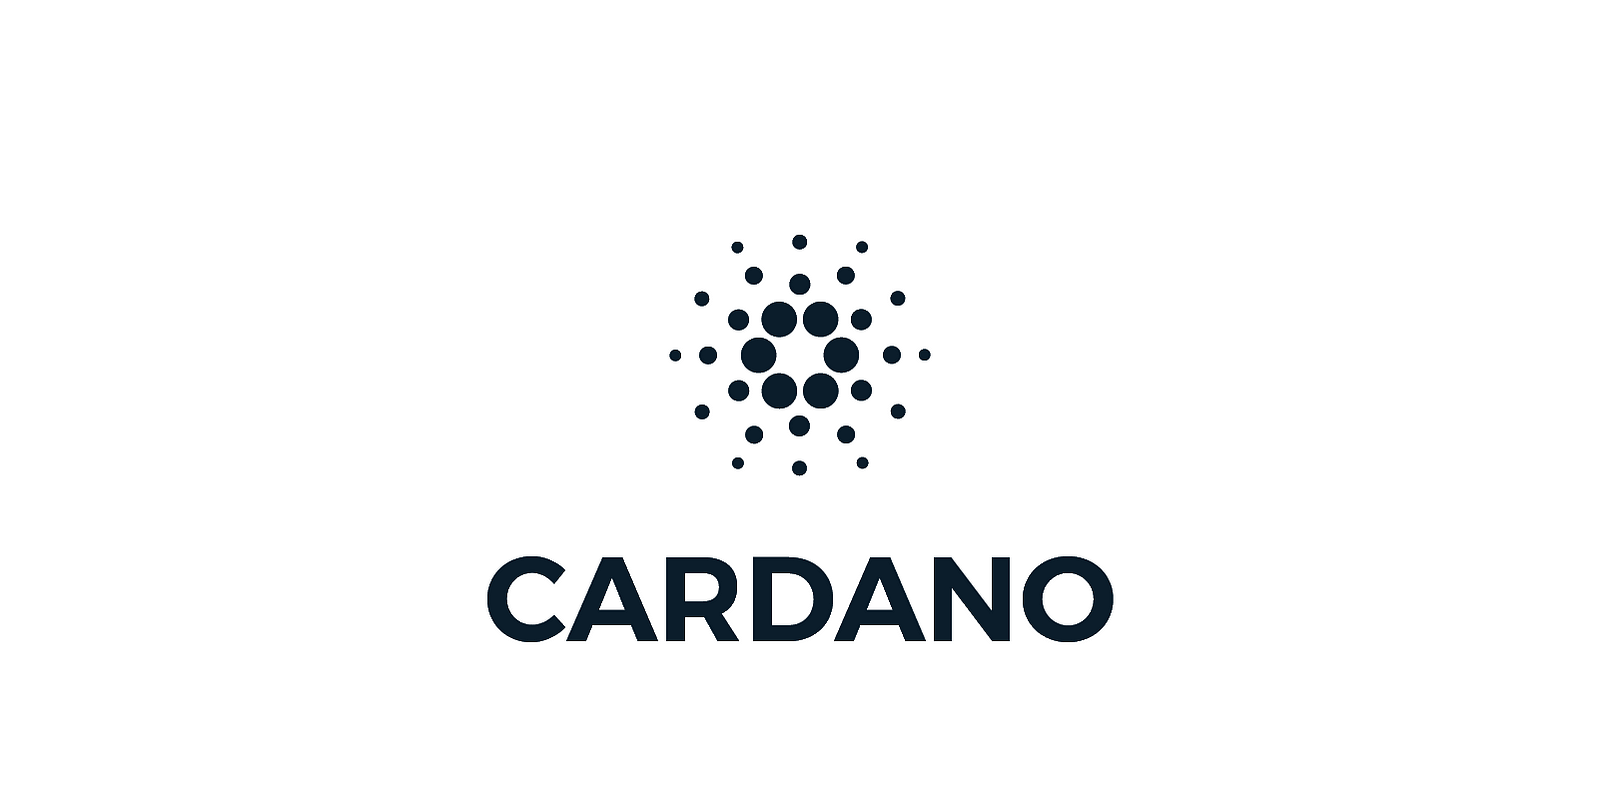 A step-by-step guide on how to buy & store the Cardano (ADA) cryptocurrency